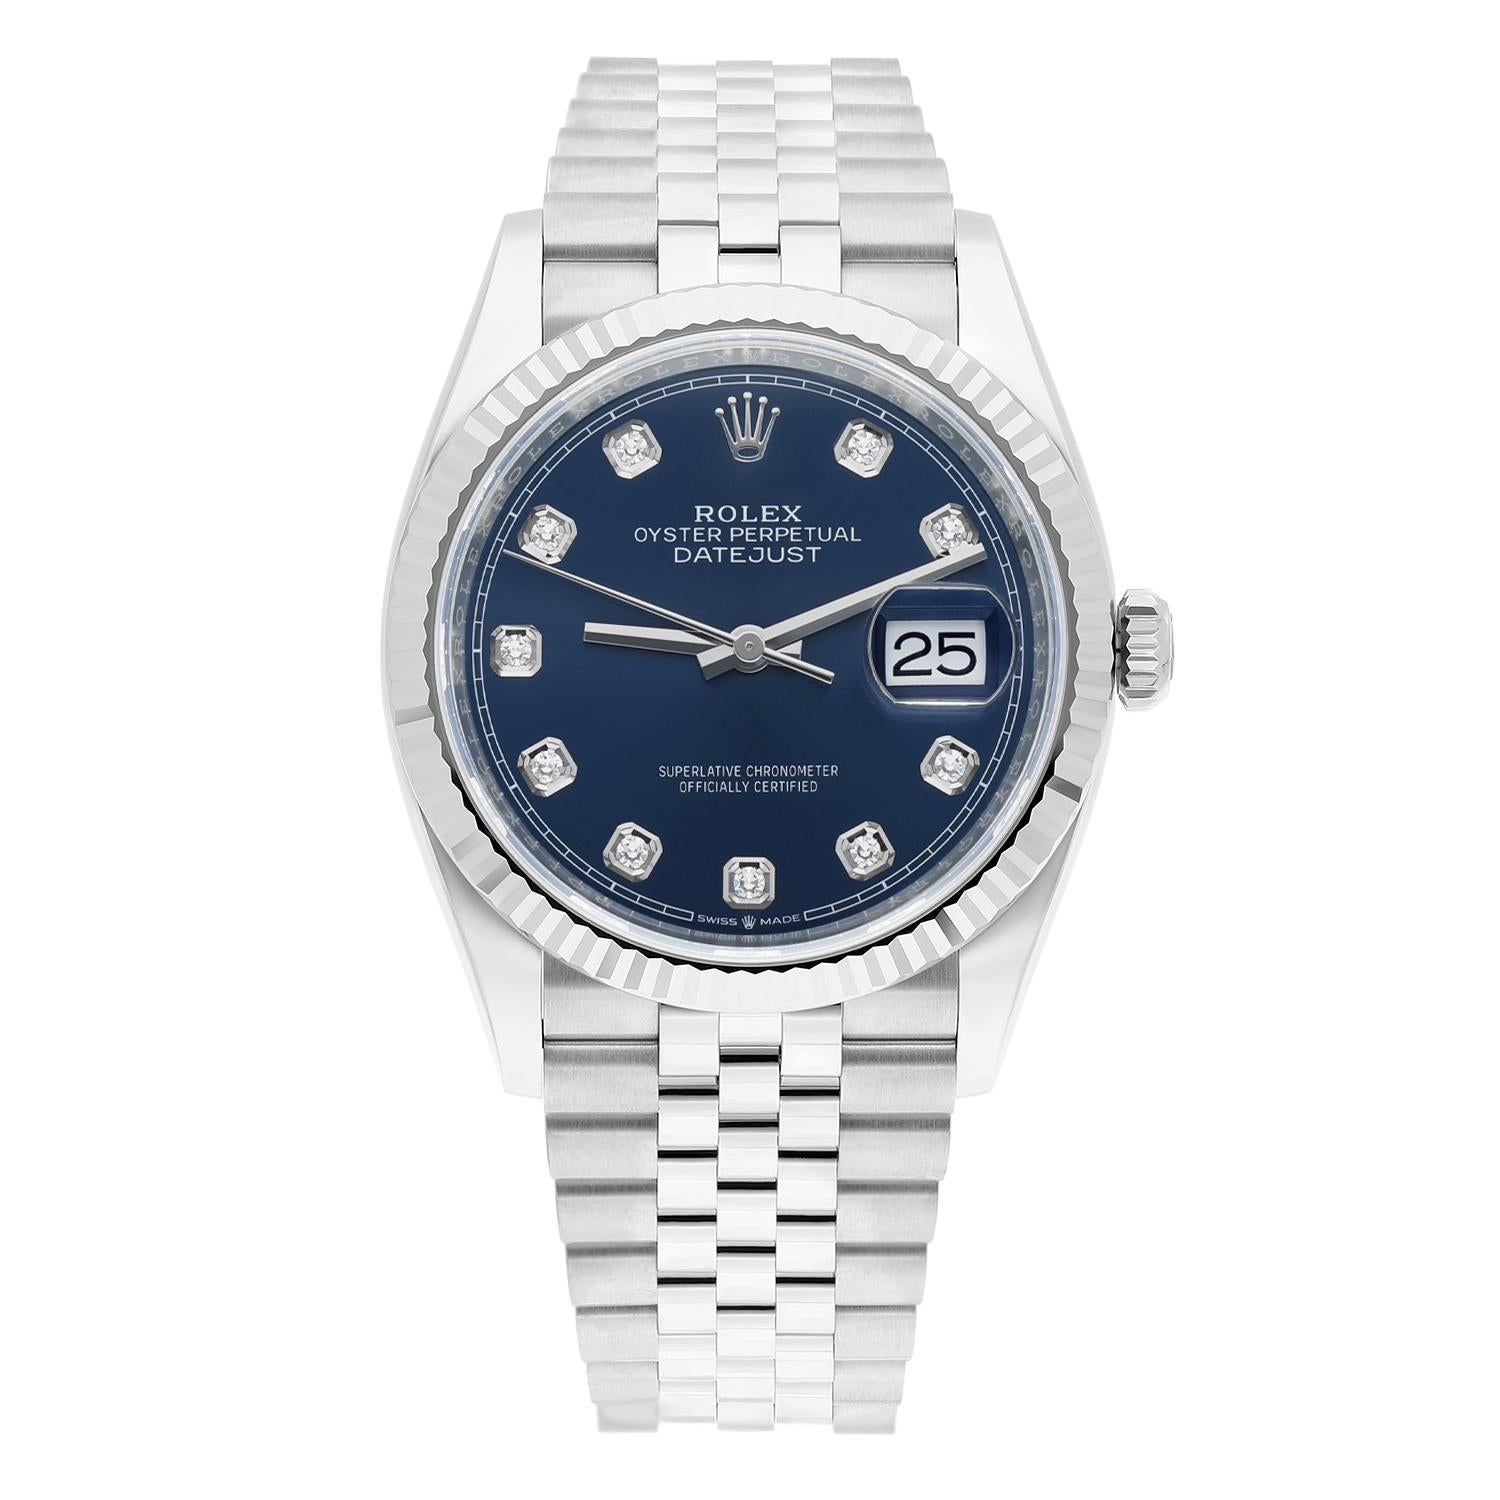 Sporting the 'best seller' blue diamond dial, solid white gold fluted bezel and elegant Jubilee bracelet, this is the all new style 36mm Datejust with new generation calibre 3235 automatic movement, released by Rolex in 2019. Power-reserve is now an